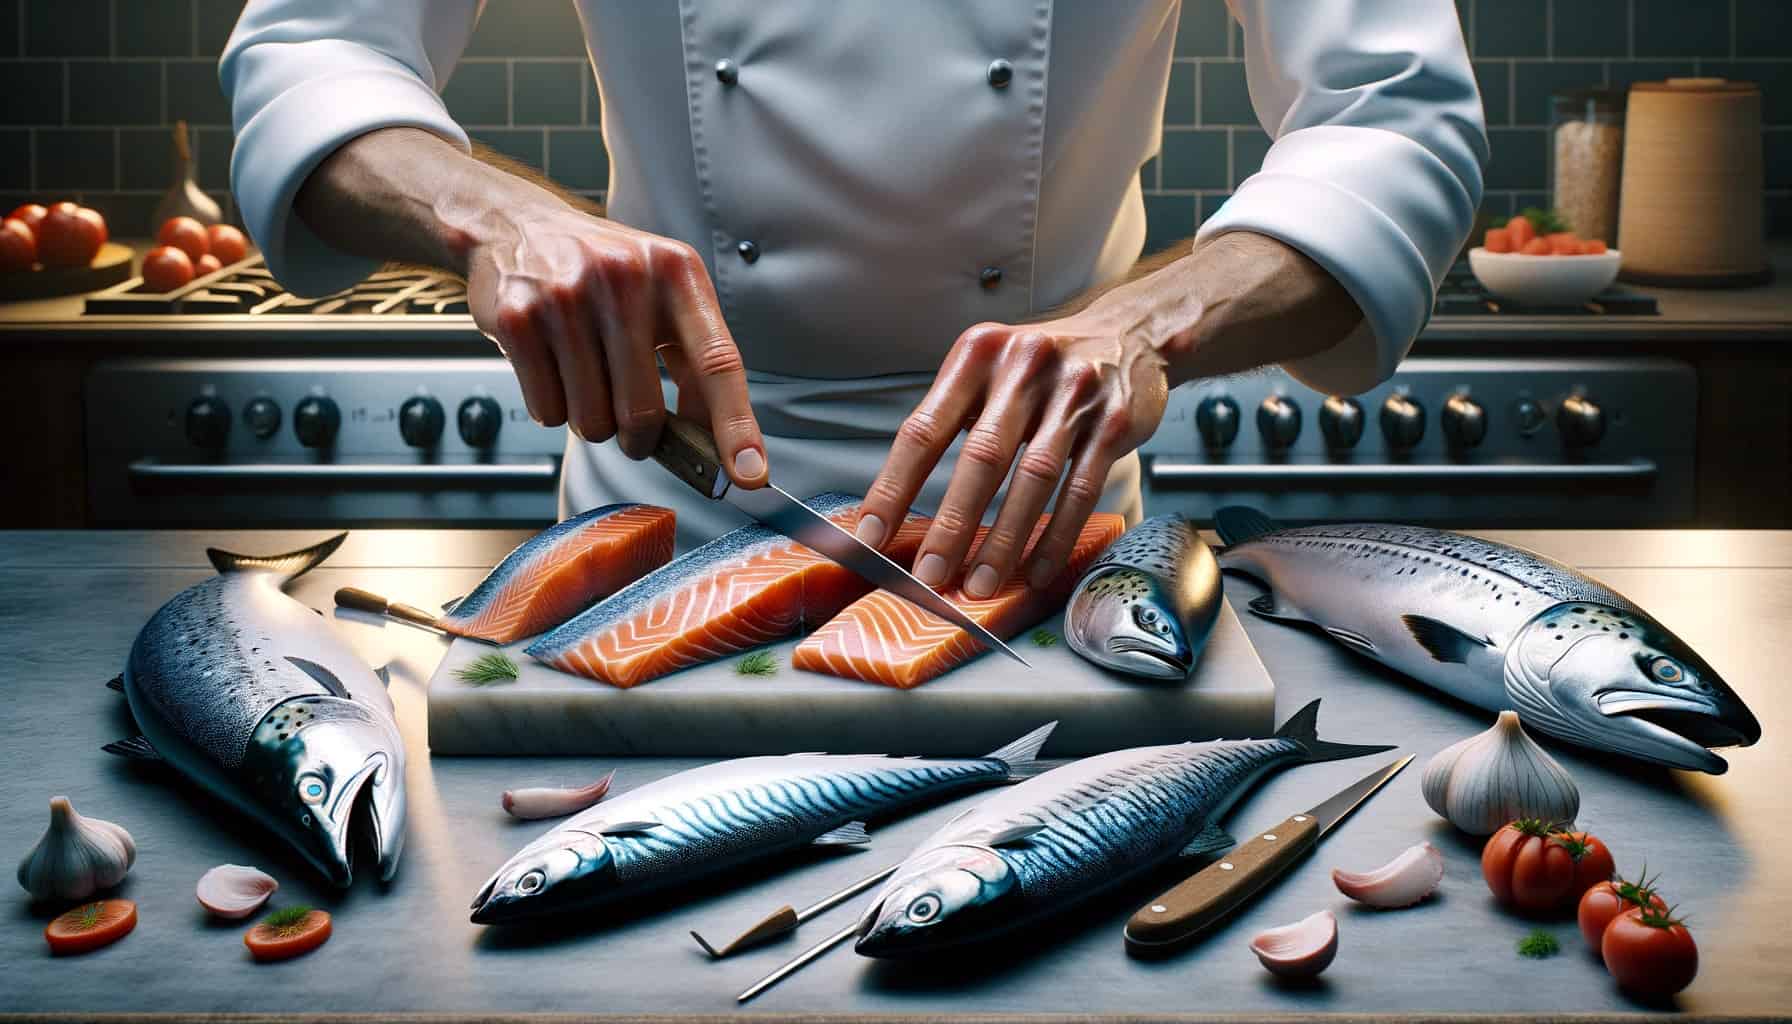 Professional chef preparing salmon, mackerel, and trout for eating